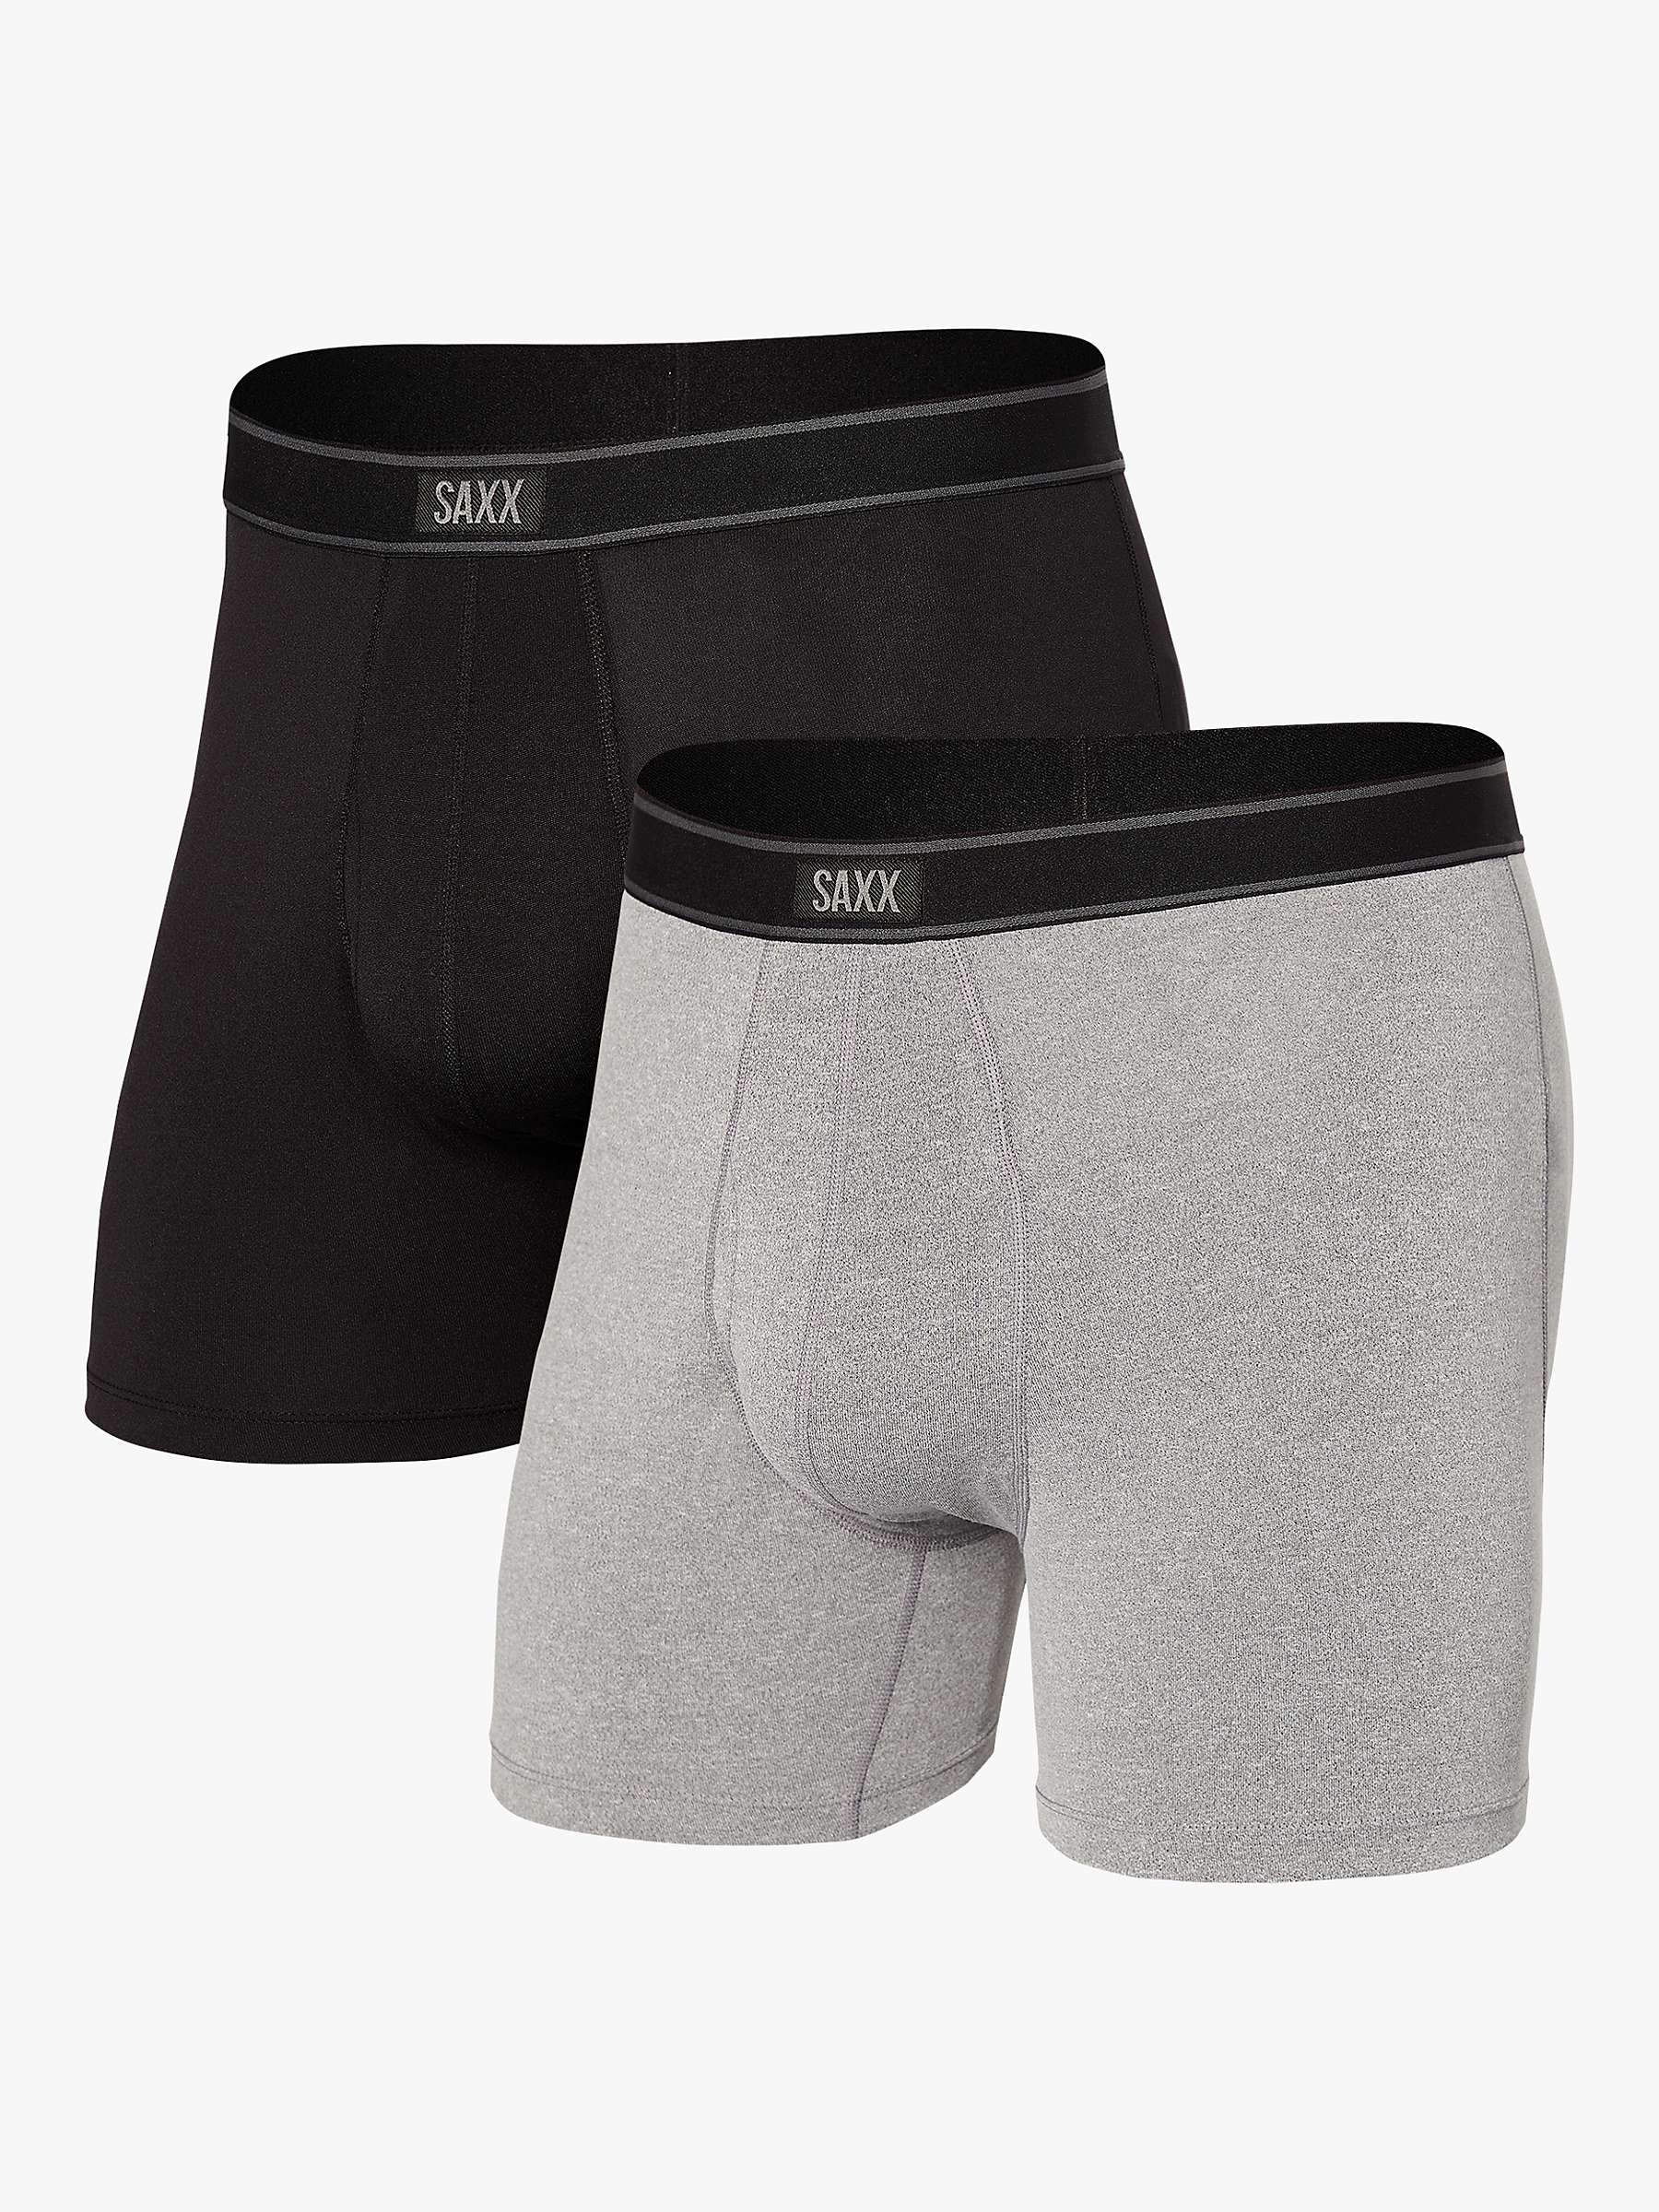 Buy SAXX Stretch Trunks, Pack of 2 Online at johnlewis.com